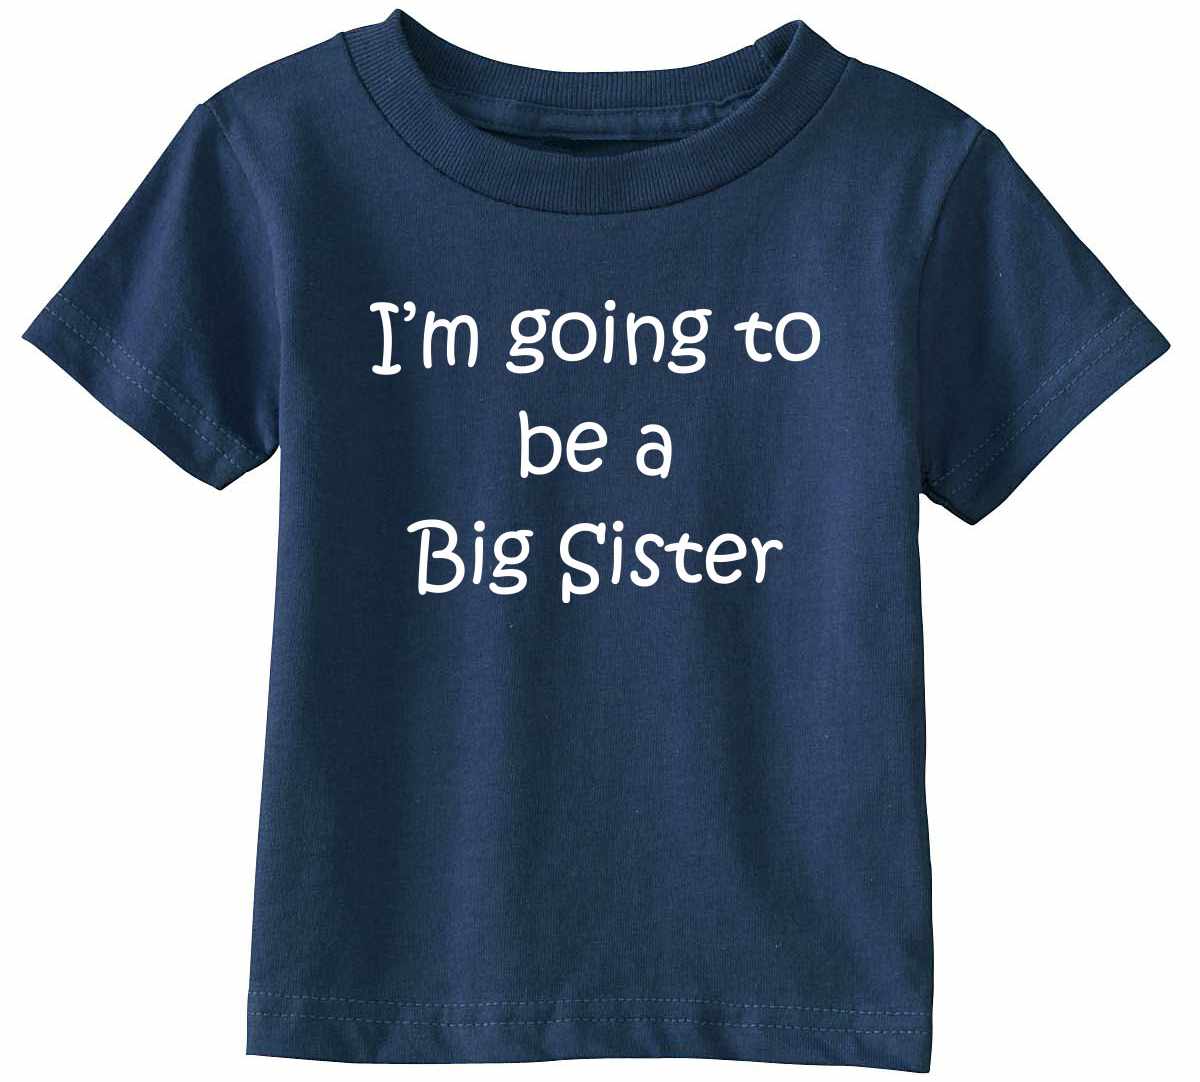 I'M GOING TO BE A BIG SISTER Infant/Toddler  (#587-7)